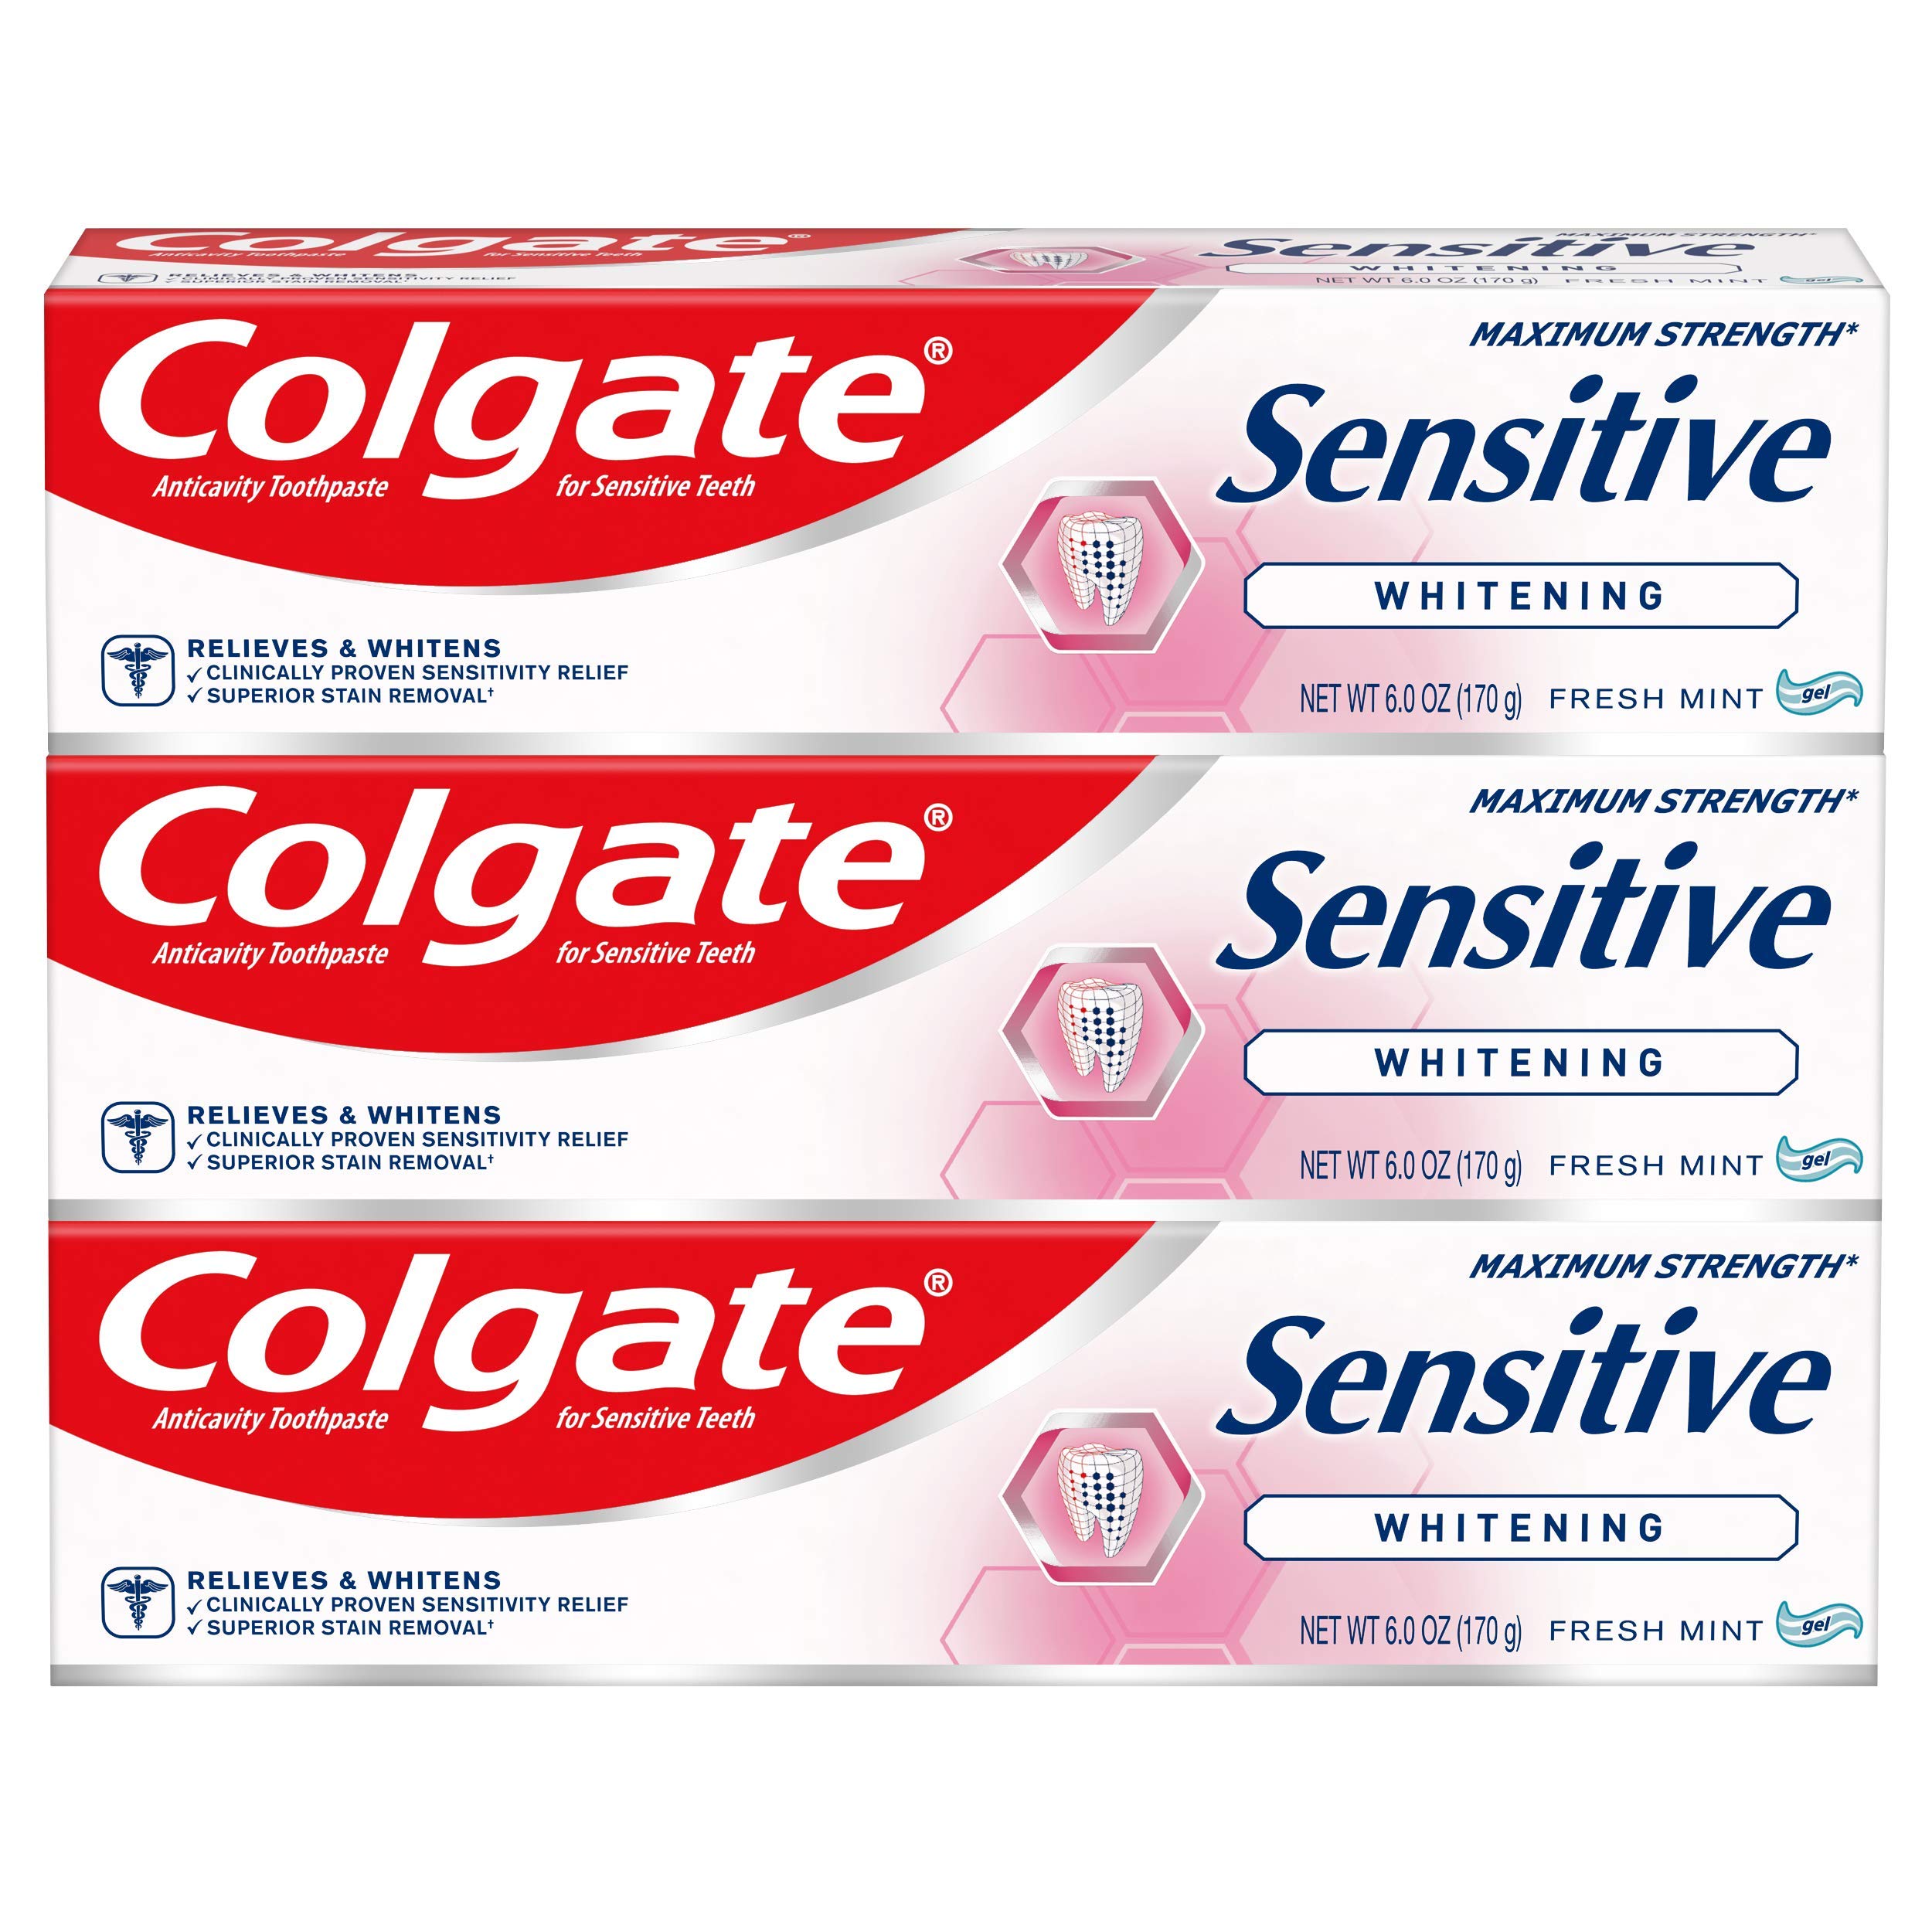 Colgate Whitening Toothpaste for Sensitive Teeth, Enamel Repair and Cavity Protection, Fresh Mint Gel, 6 Oz (Pack of 3) - 20% off S&S coupon YMMV $5.84